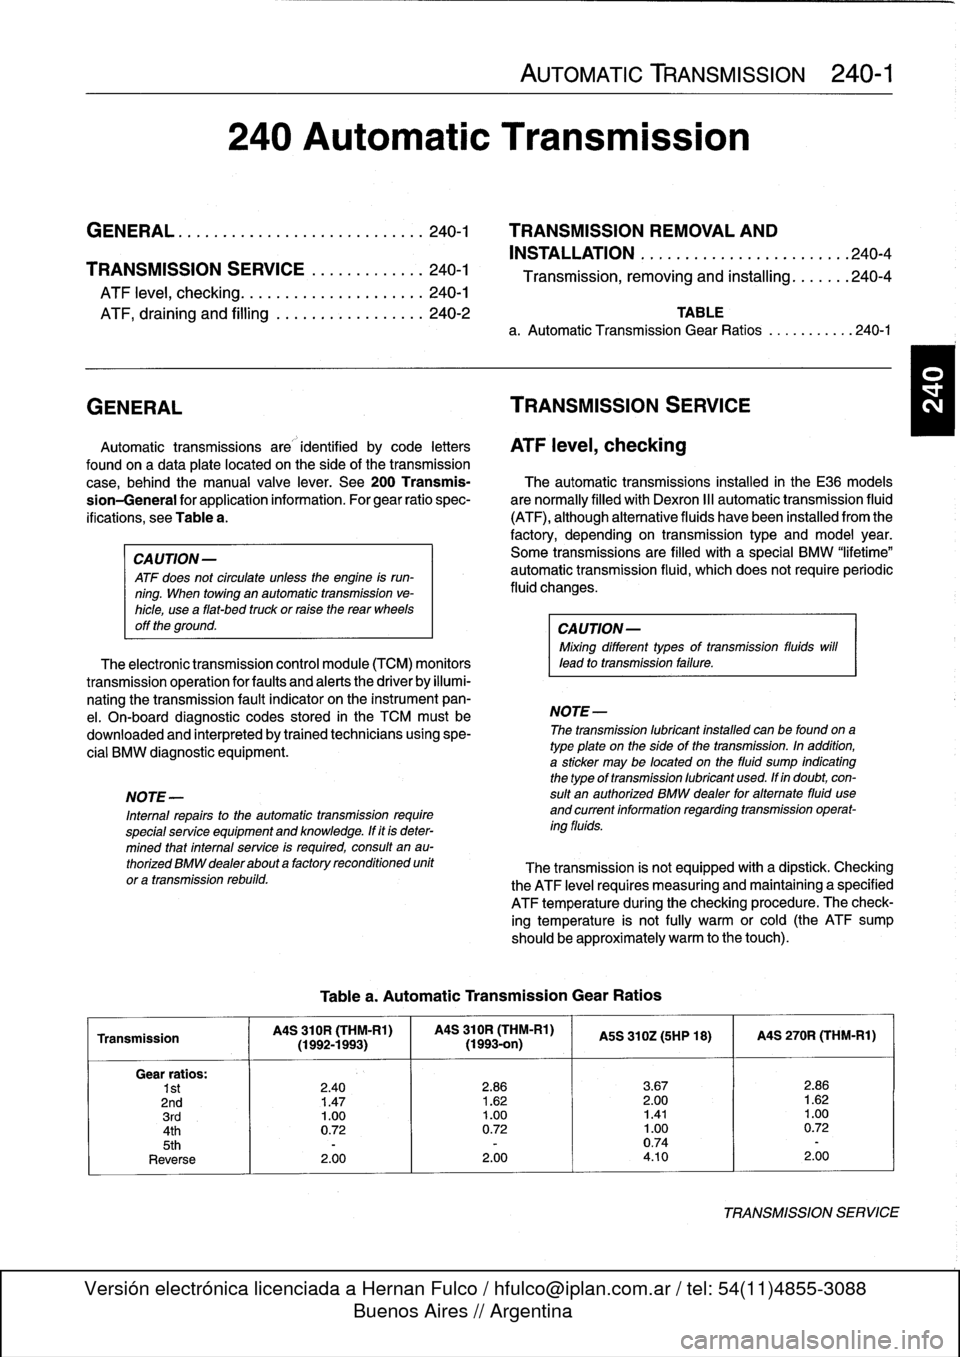 BMW 328i 1994 E36 Workshop Manual 
AUTOMATIC
TRANSMISSION

	

240-1

240
Automatic
Transmission

GENERAL
.....
.
.
.
.
.
.
.
.
.
.
.
.
.
.........
.
240-1

	

TRANSMISSION
REMOVAL
AND

INSTALLATION
..................
.
.
.
.
.240-4
TR